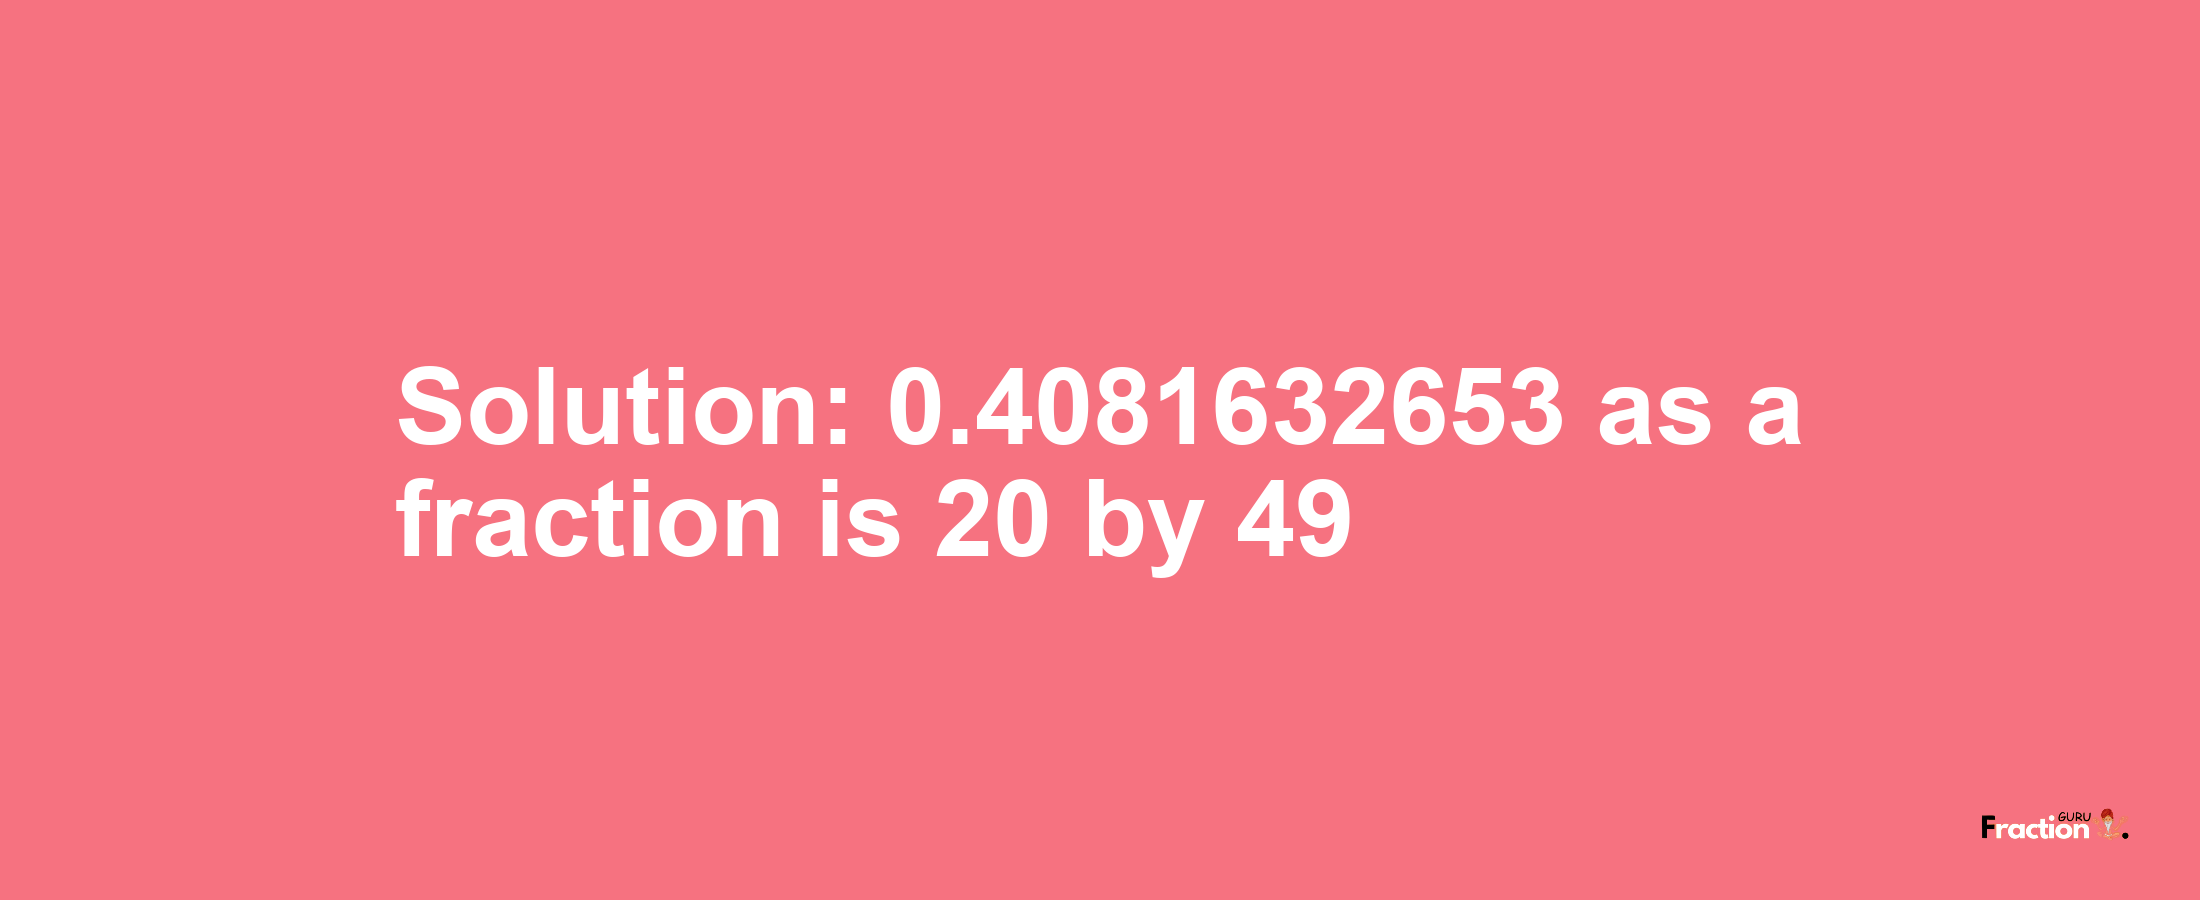 Solution:0.4081632653 as a fraction is 20/49